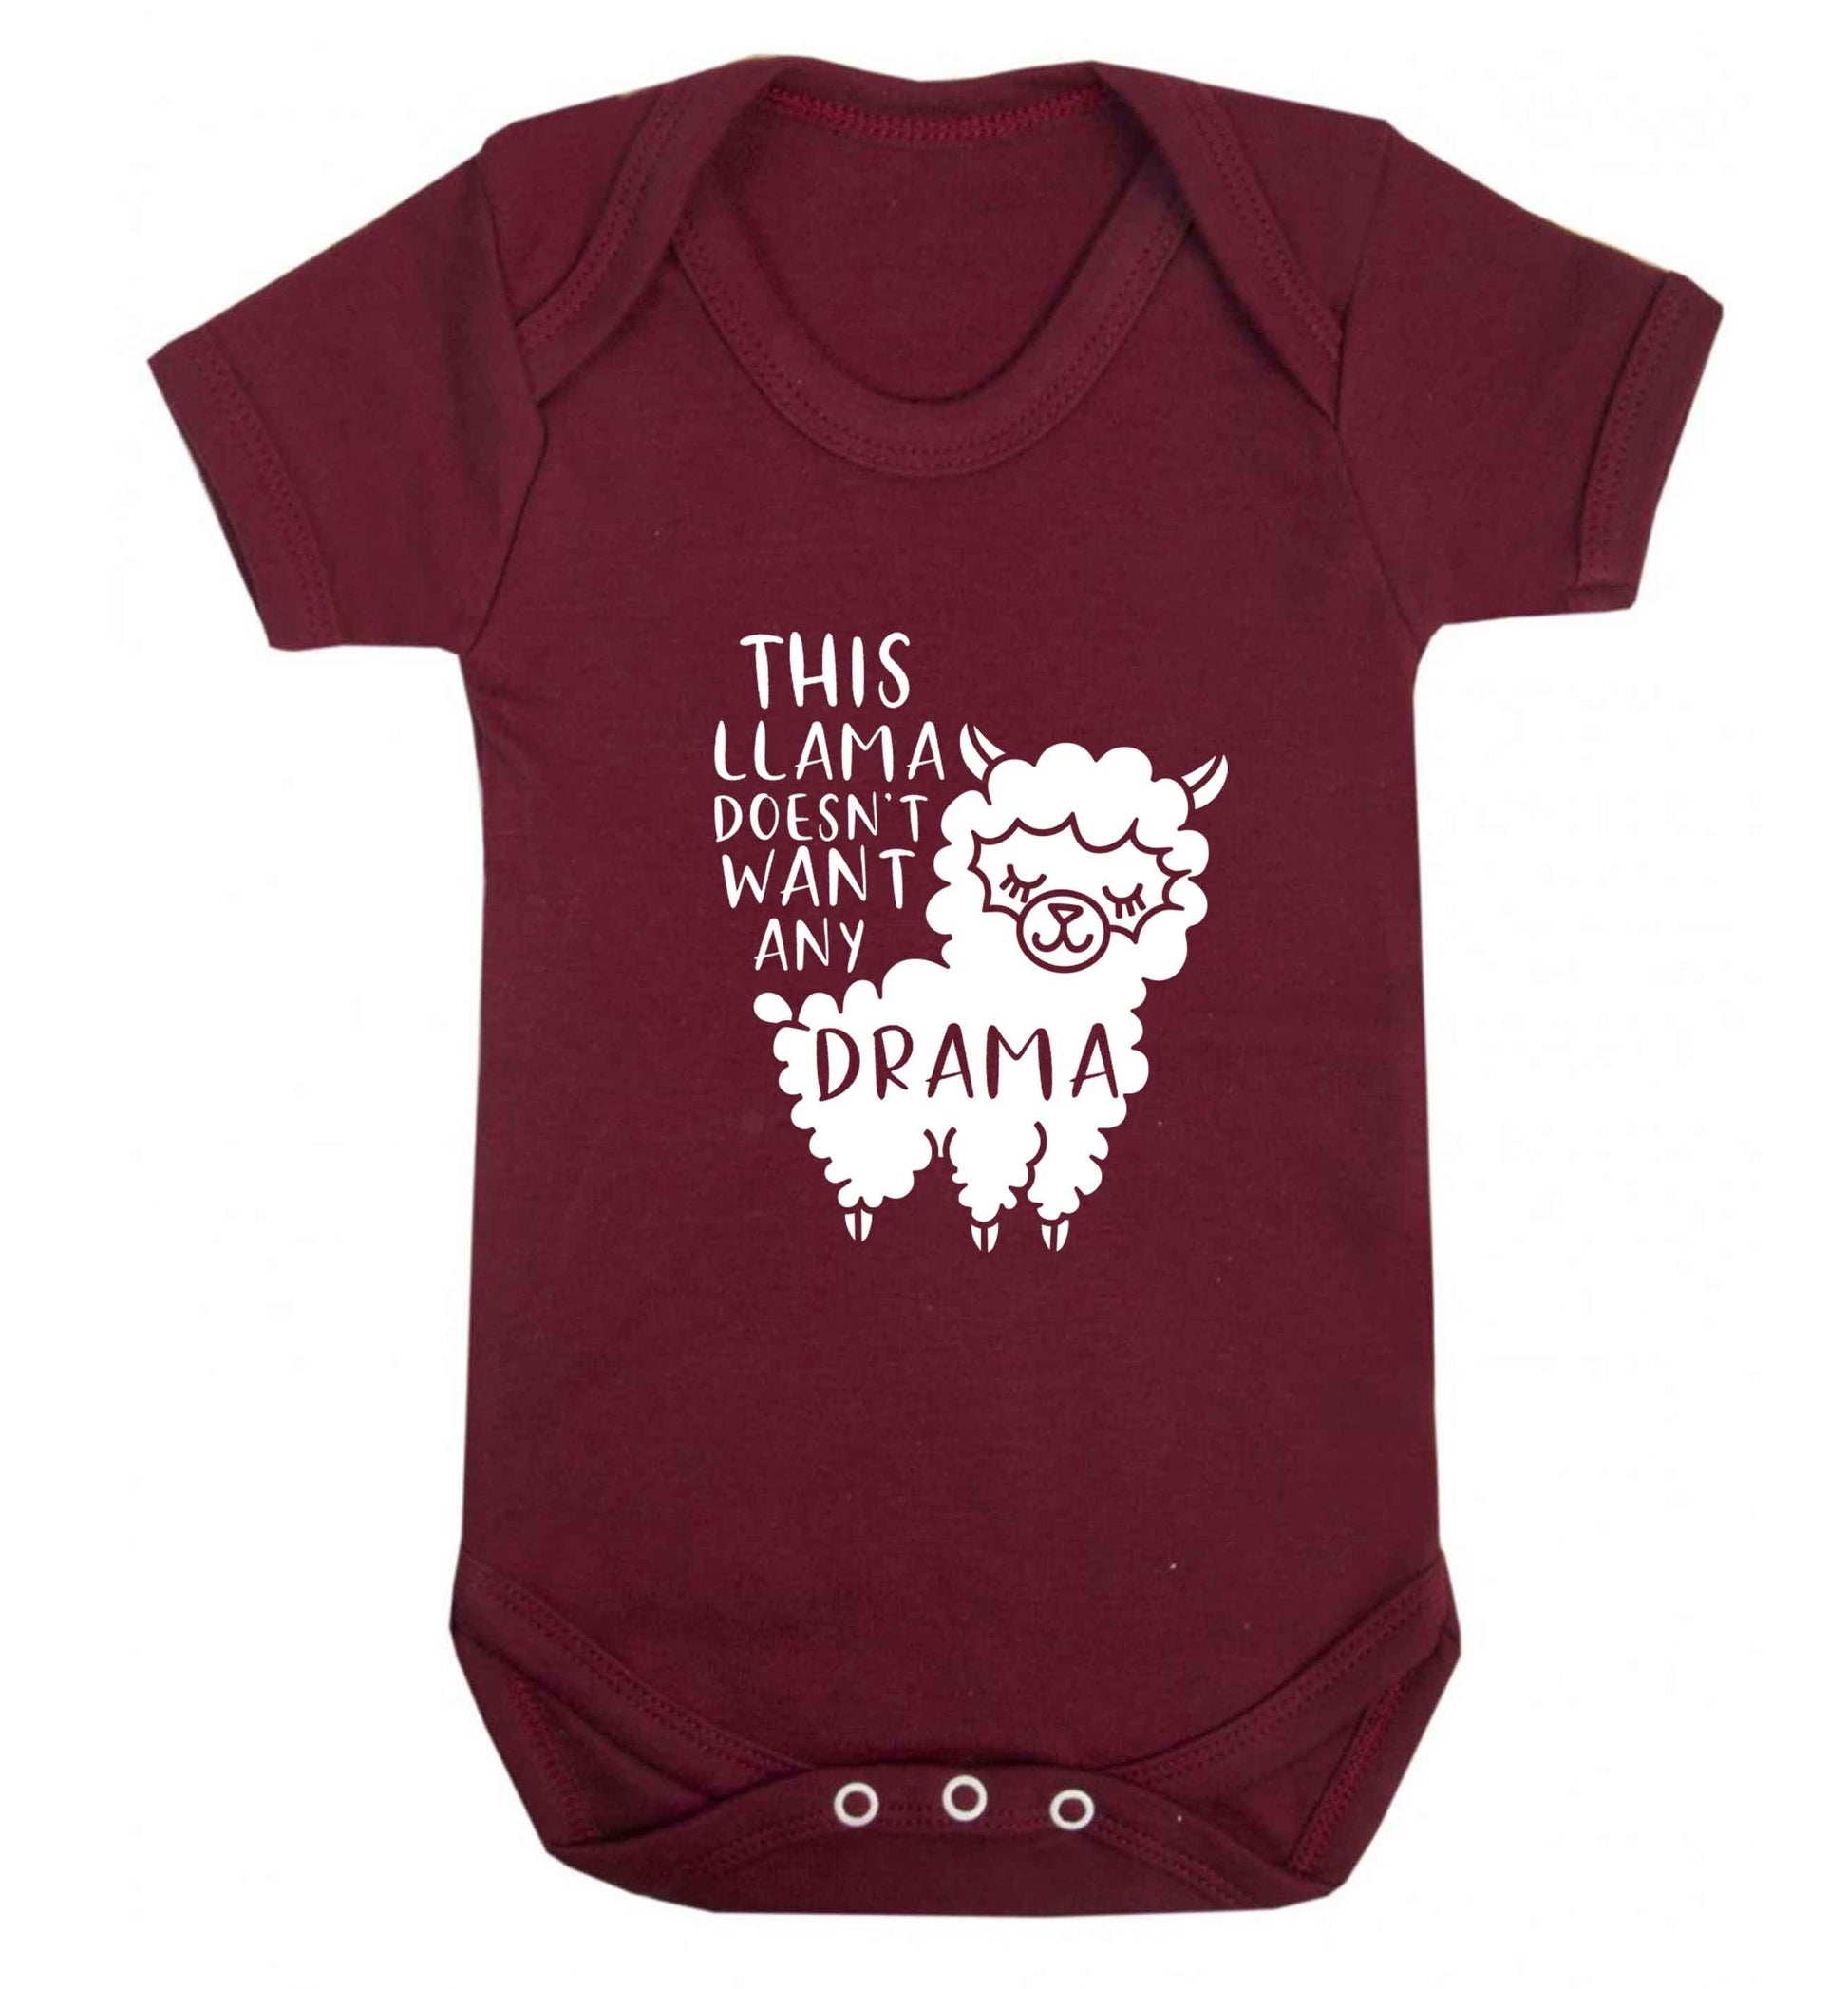 This Llama doesn't want any drama baby vest maroon 18-24 months